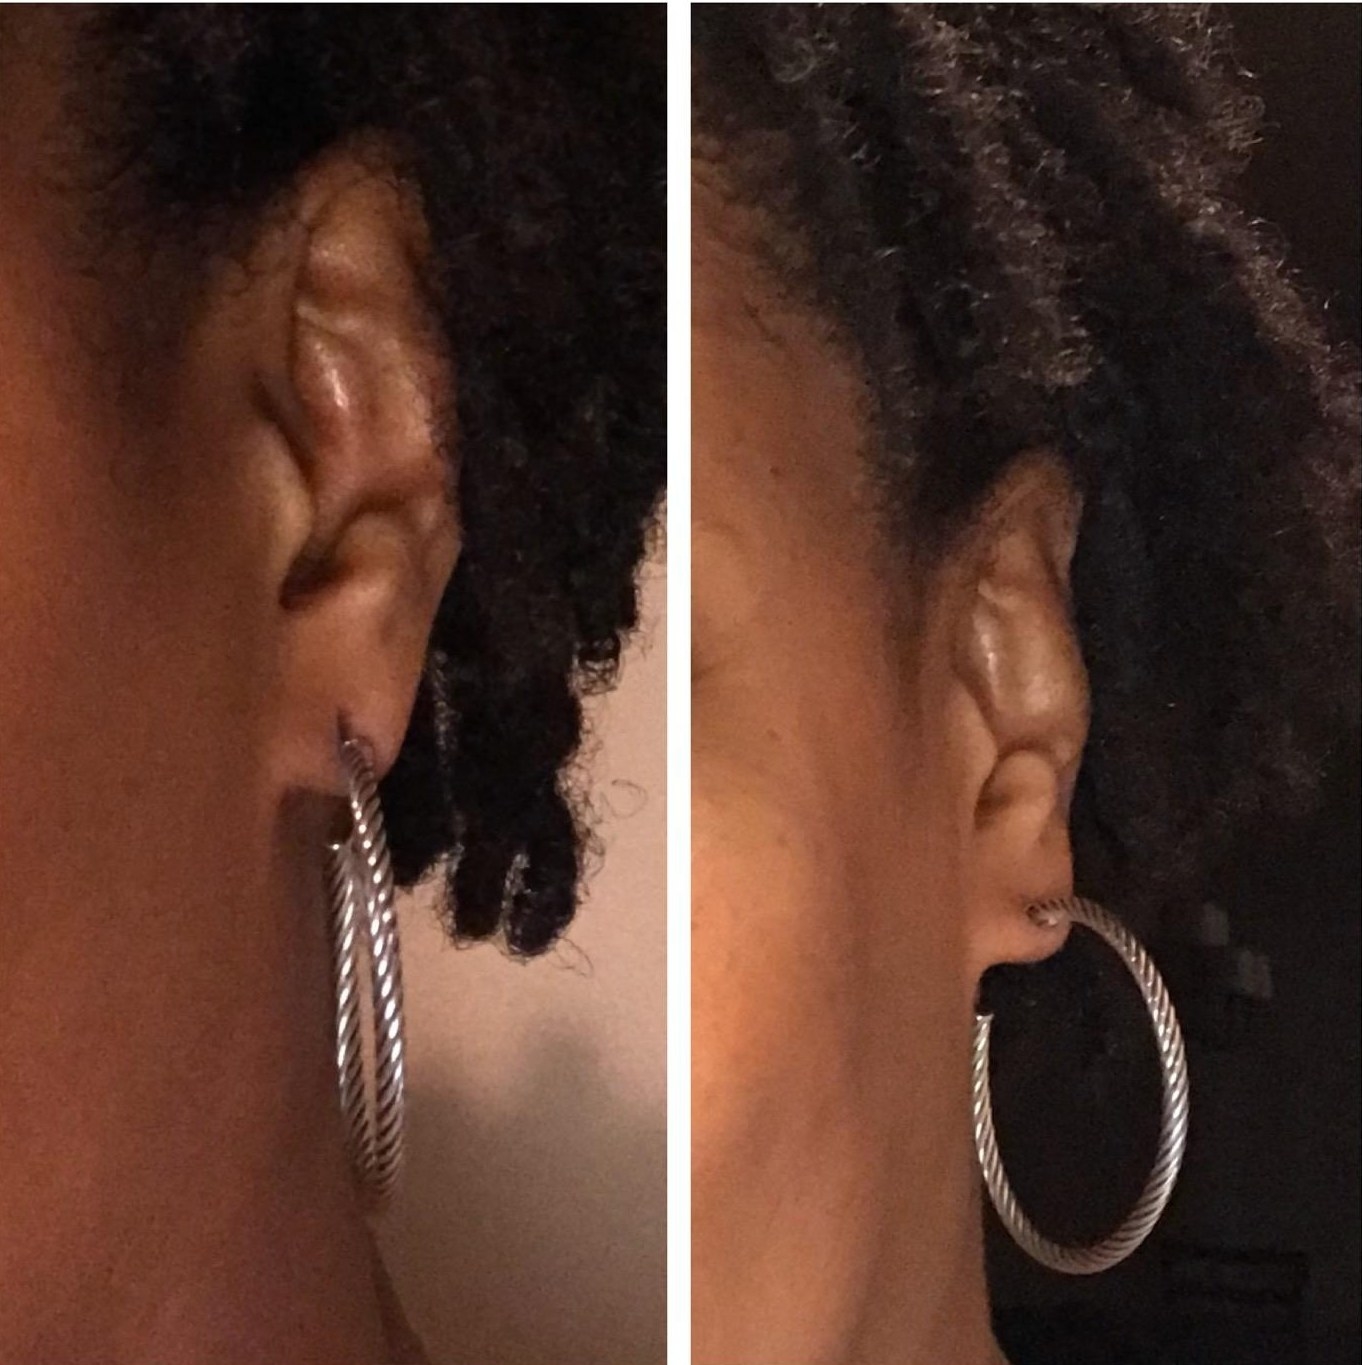 reviewer wearing hoops with droopy stretched piercing hole before then earring perky without visible stretching after